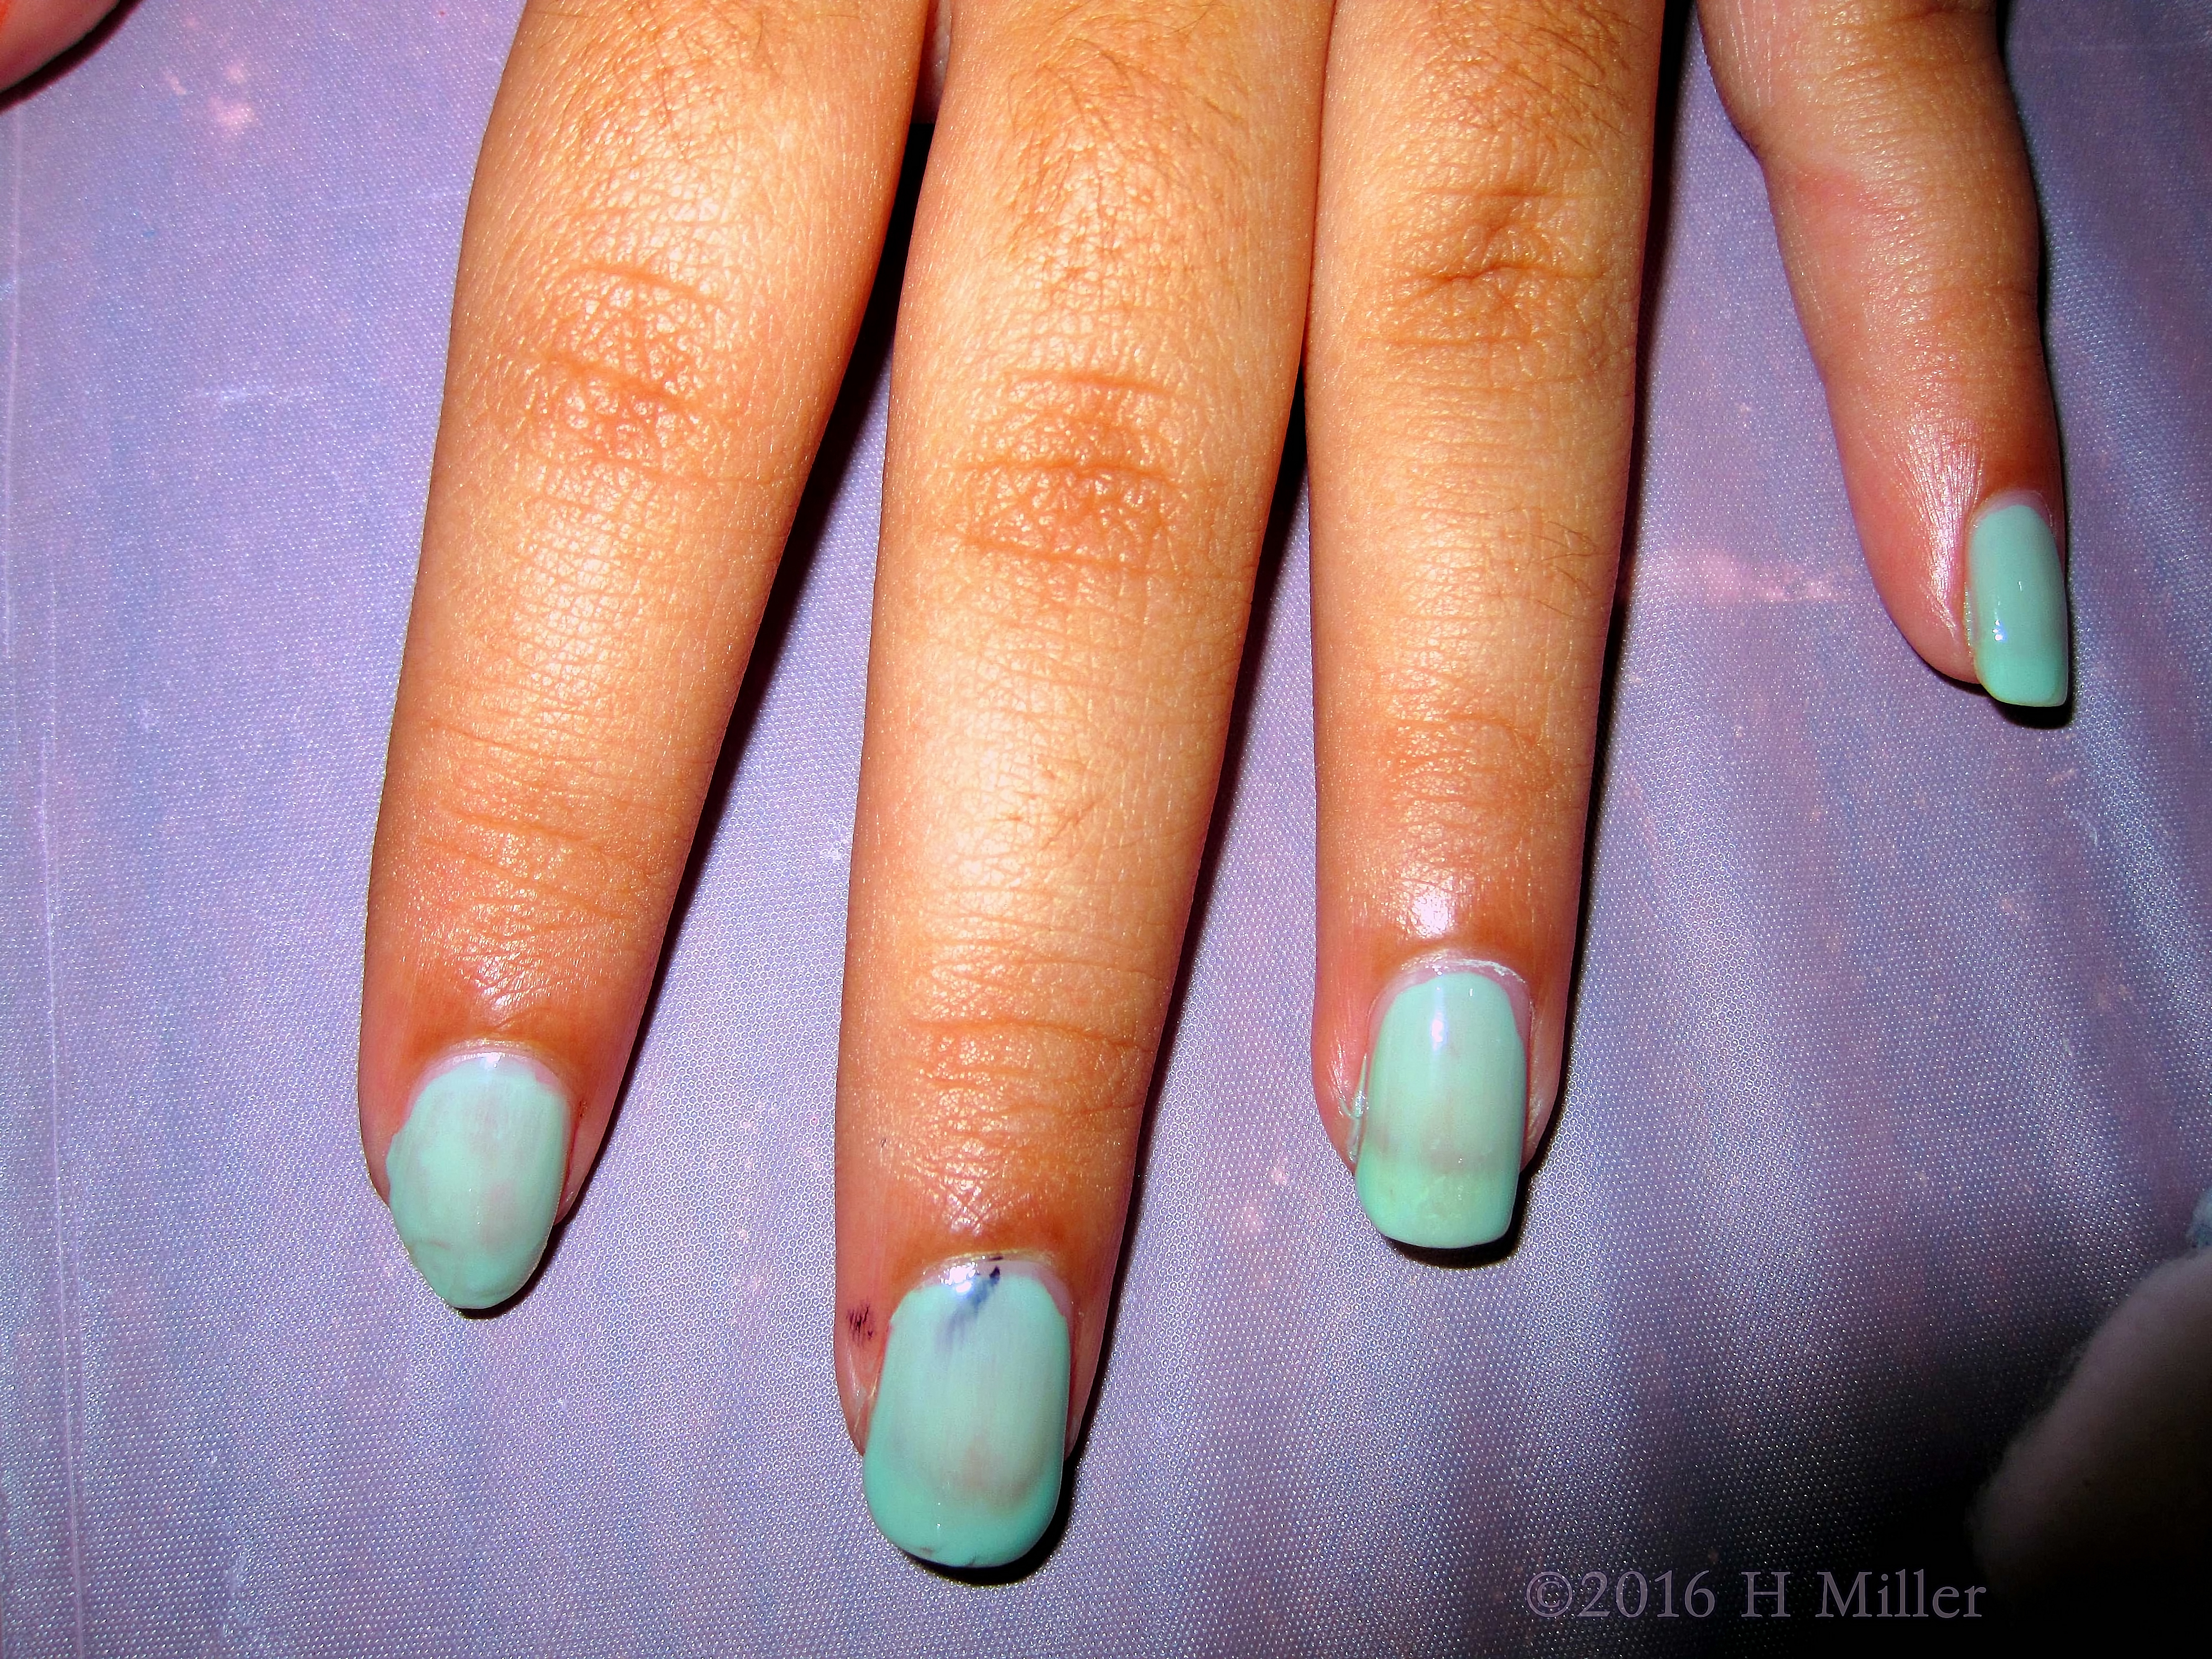 One More Click Of This Pretty Kids Manicure! 